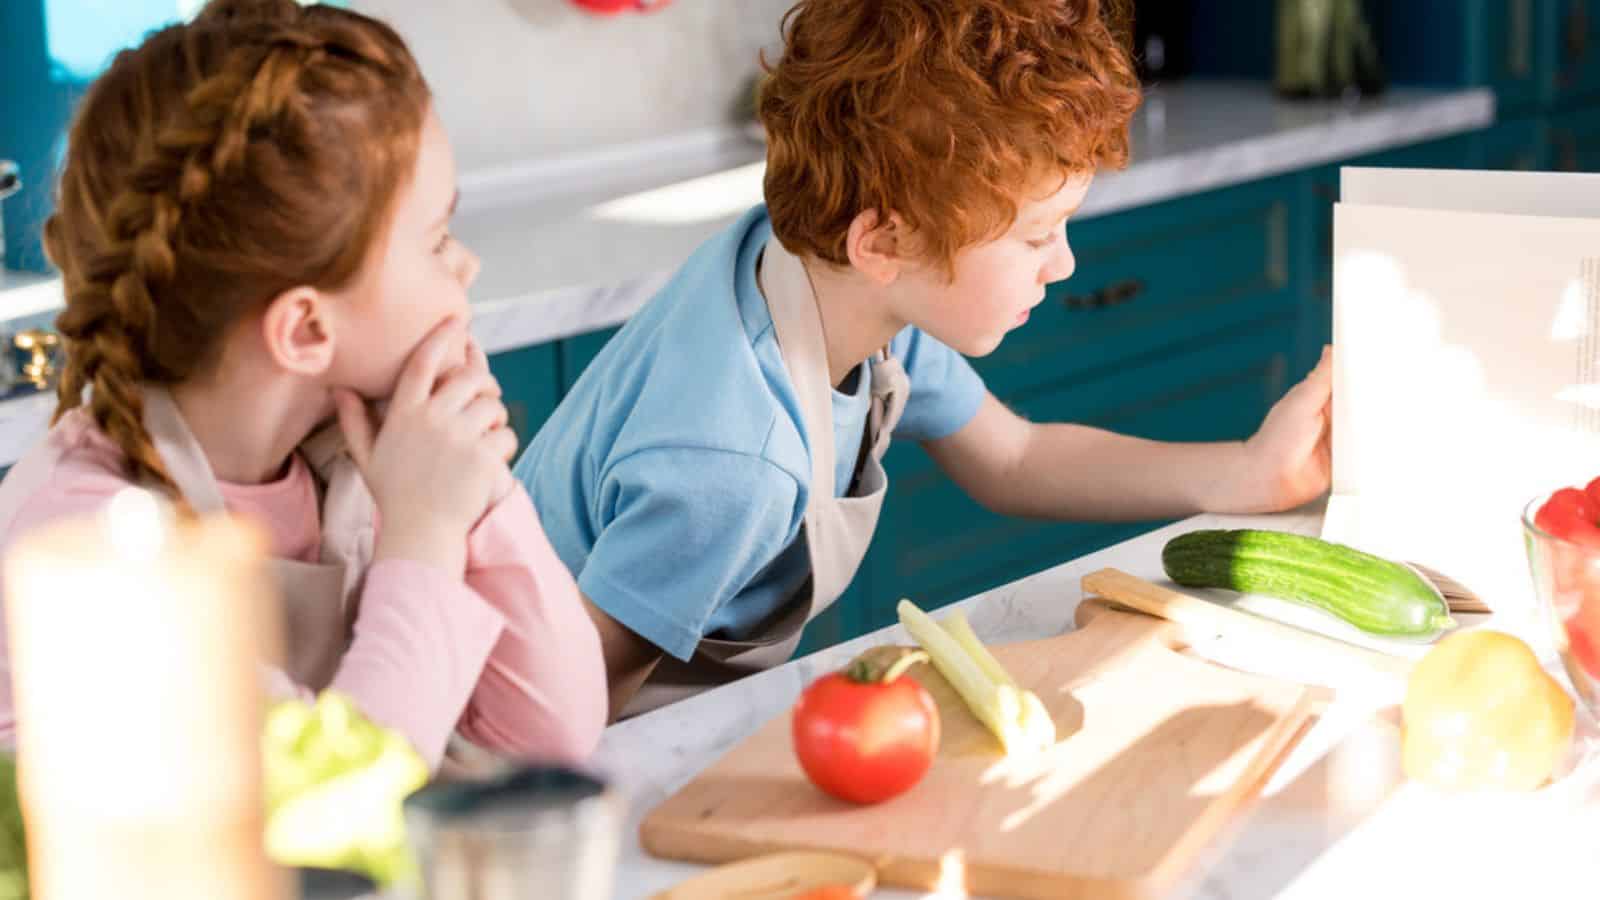 Children in aprons reading coobook while preparing vegetable